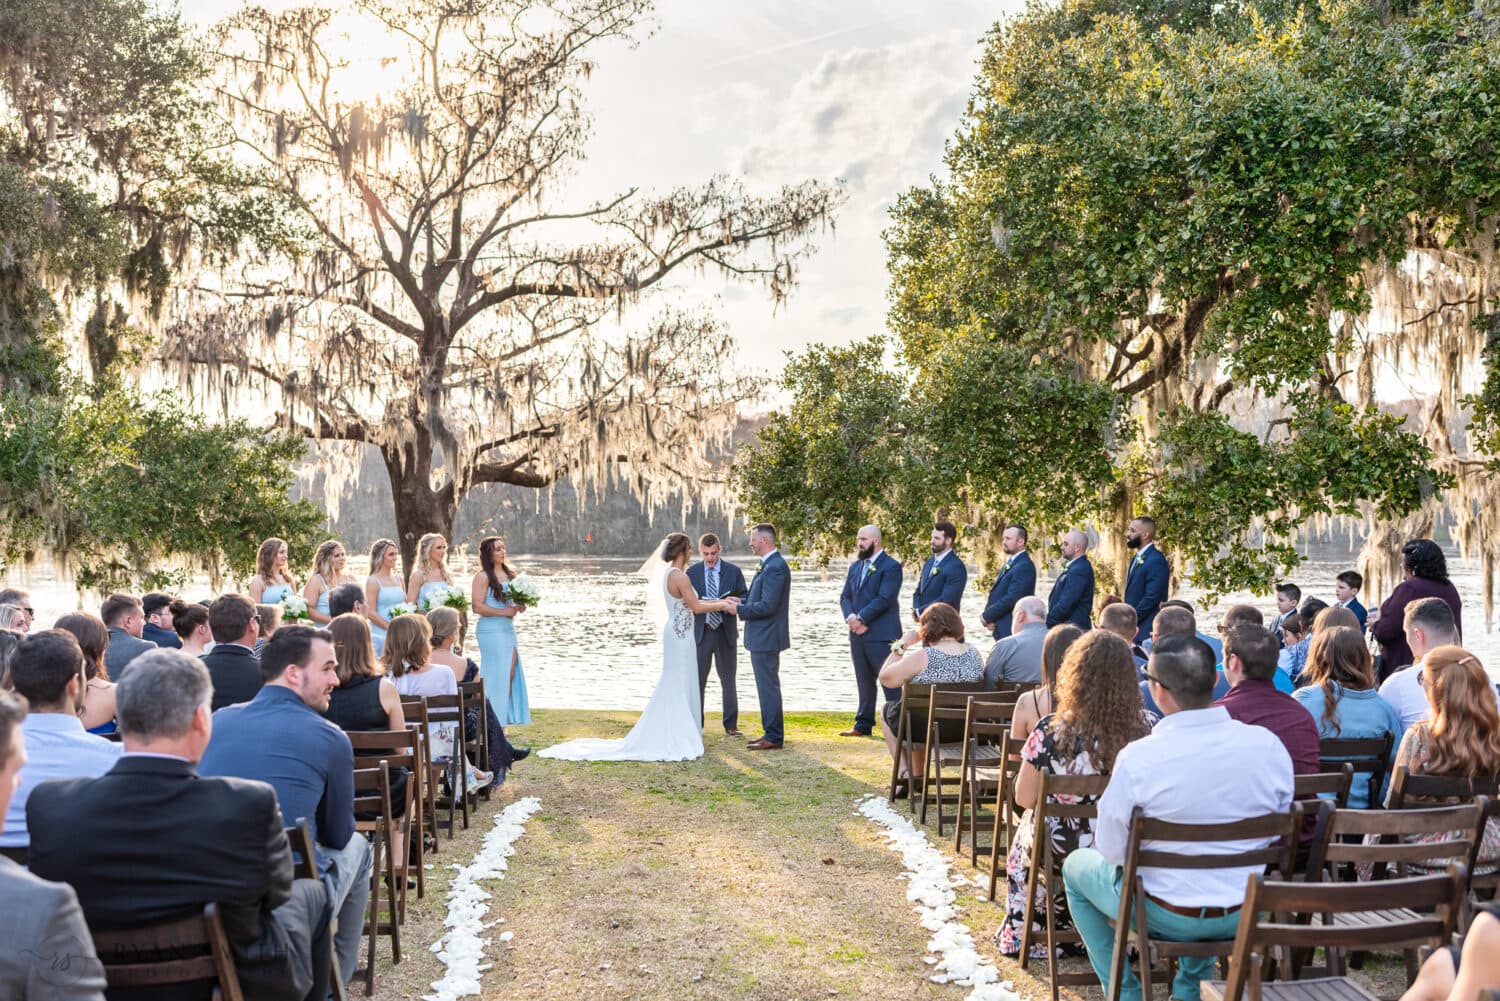 Beautiful ceremony by the river - Kimbels at Wachesaw Plantation